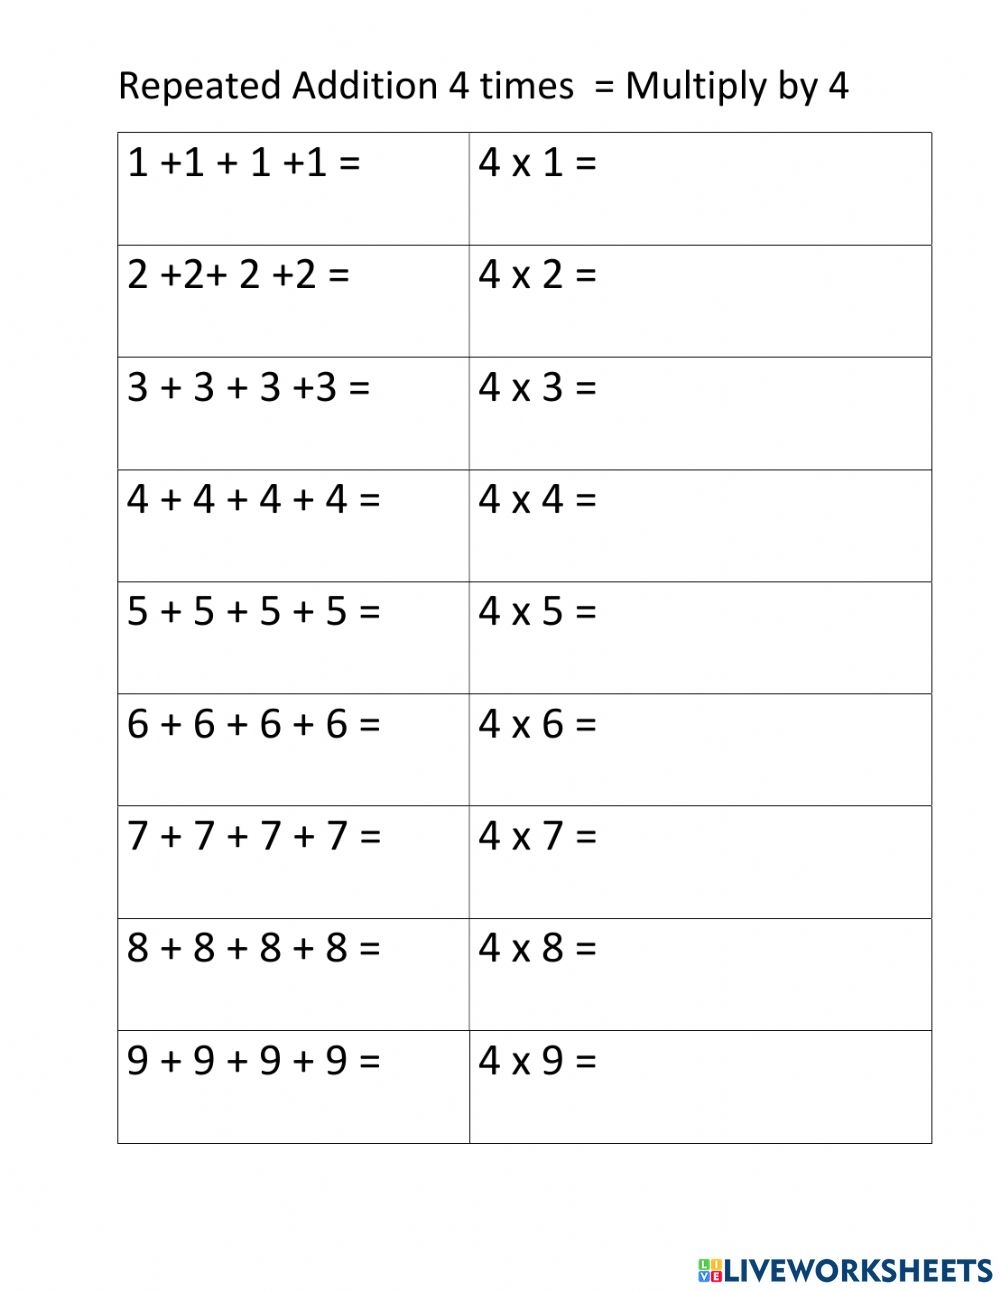 Repeat Add 4 Times Multiply By 4 Worksheet